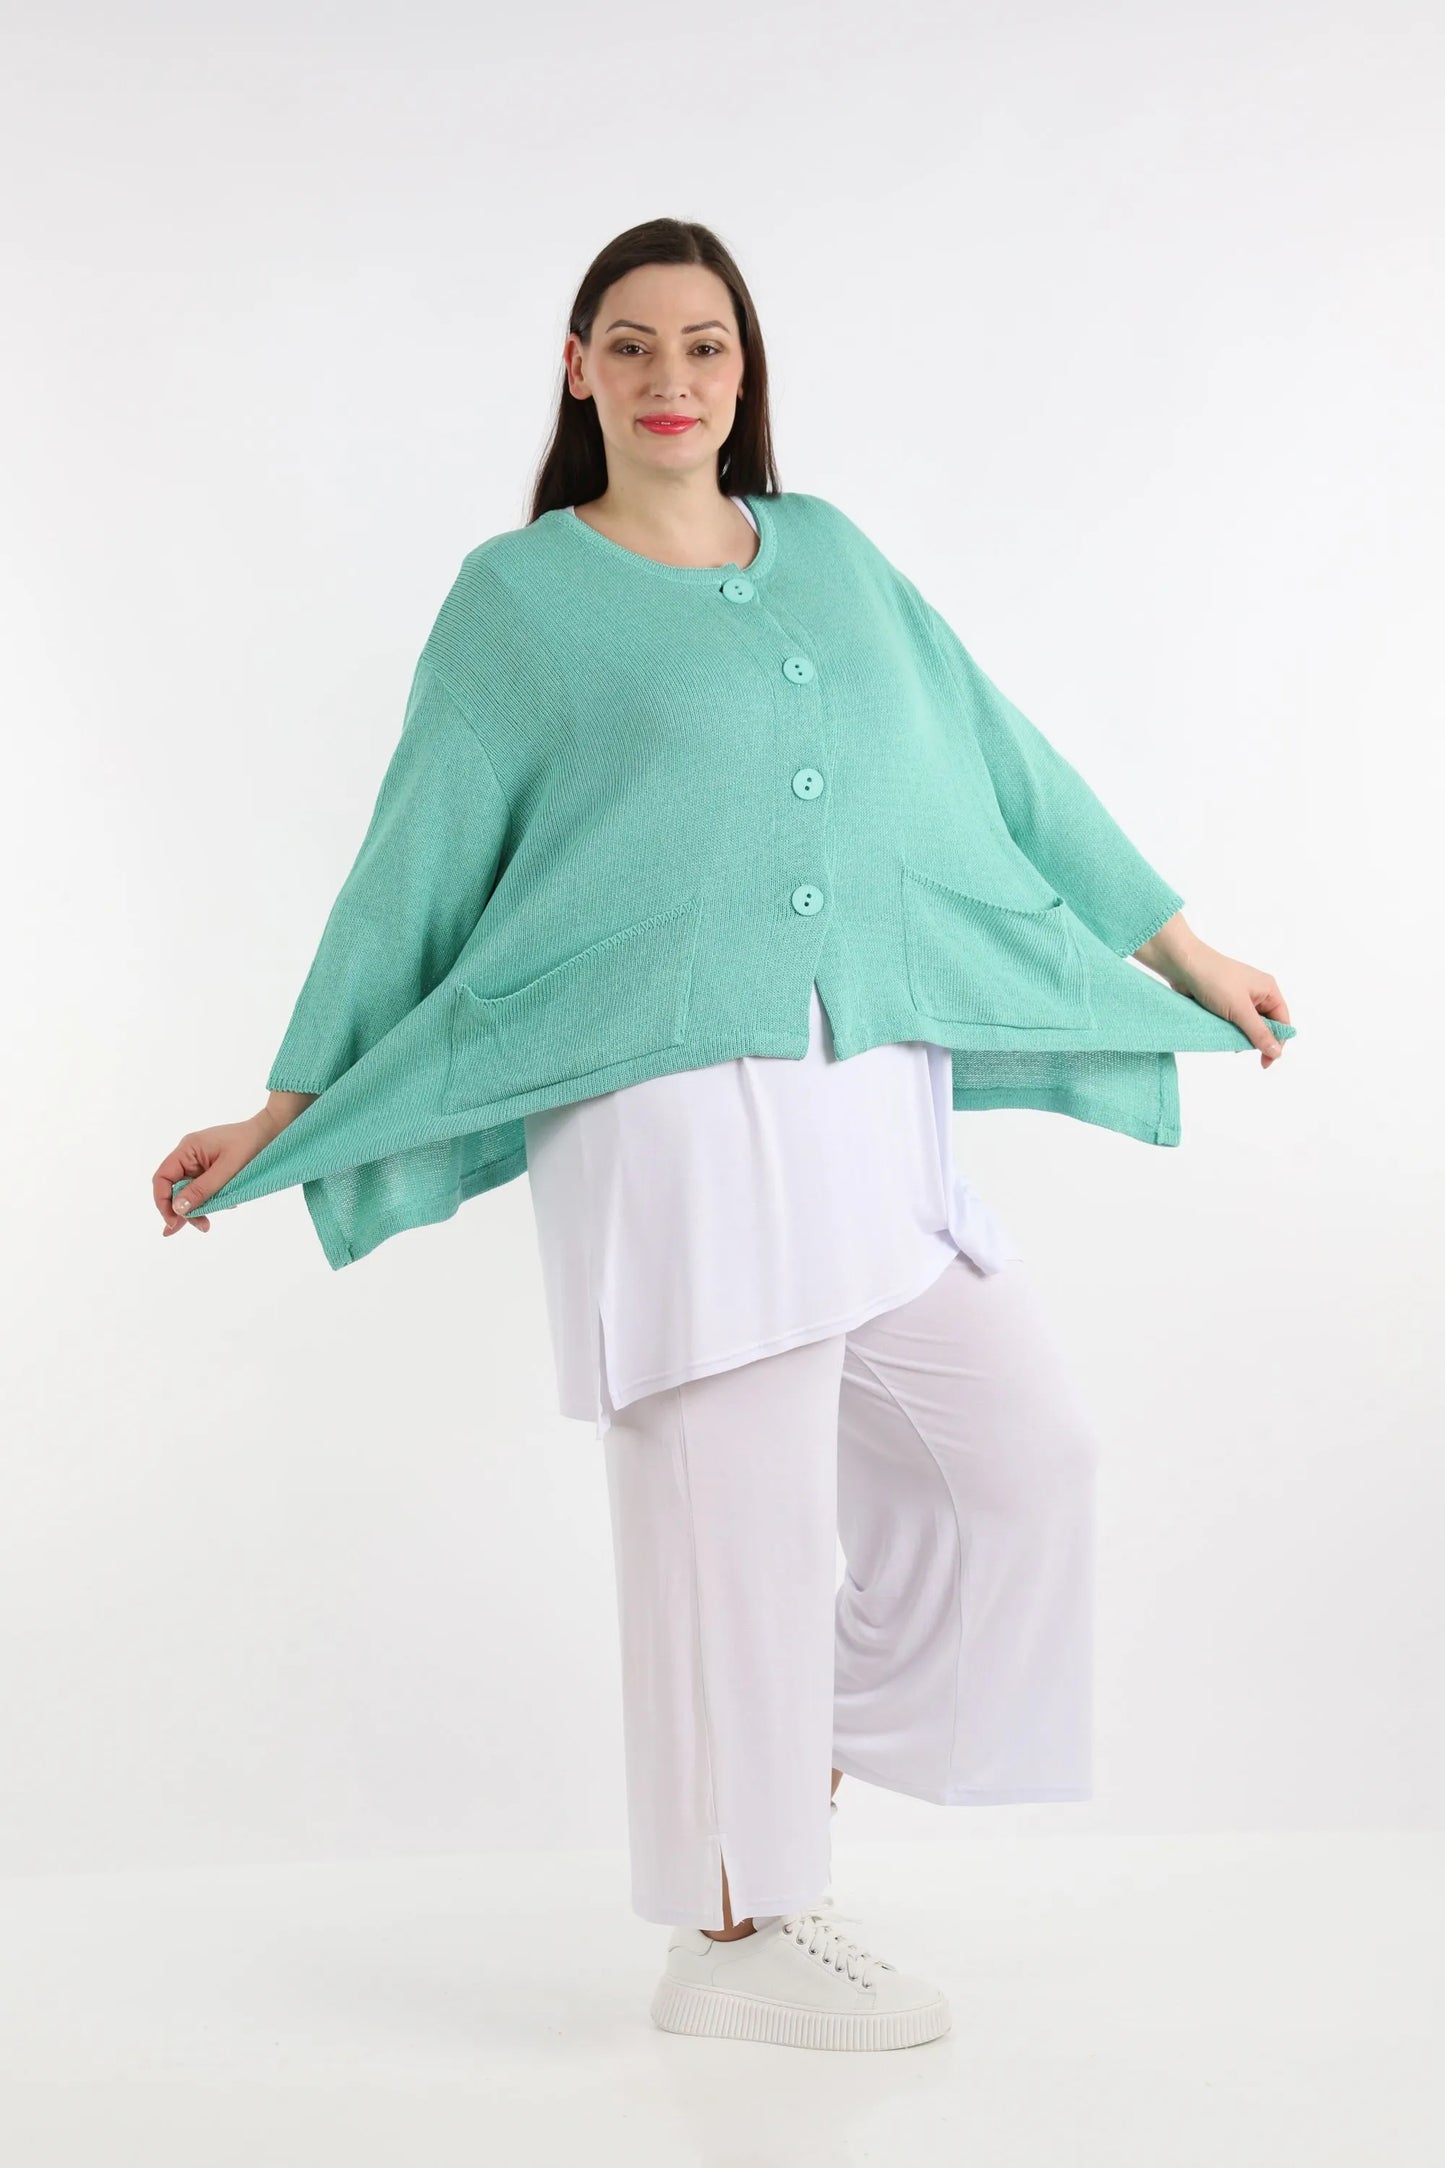 Summer jacket in A-shape made of light knit quality, knit in mint